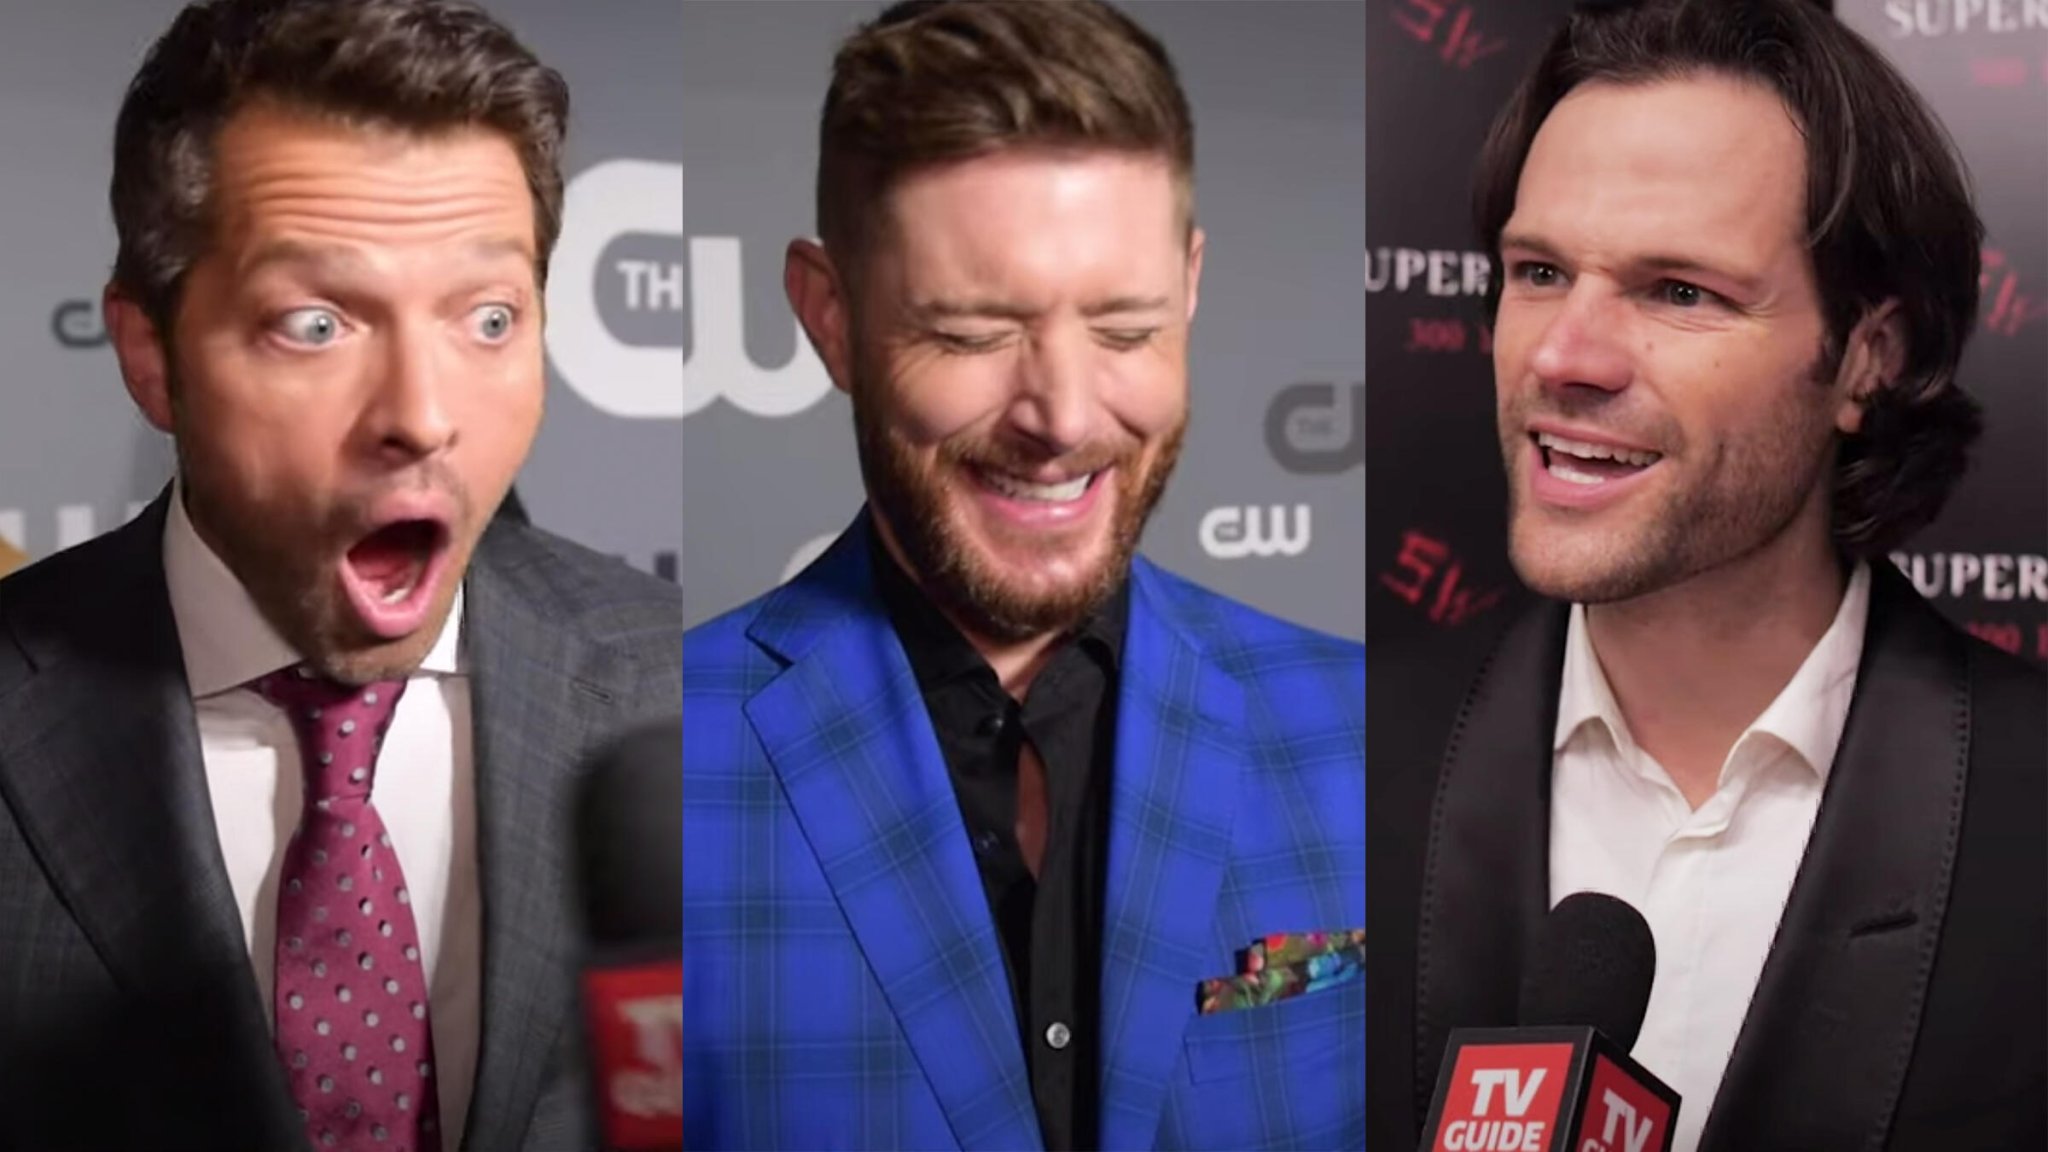 These Hilarious Supernatural Interview Outtakes Are Jared and Jensen at Their Goofiest